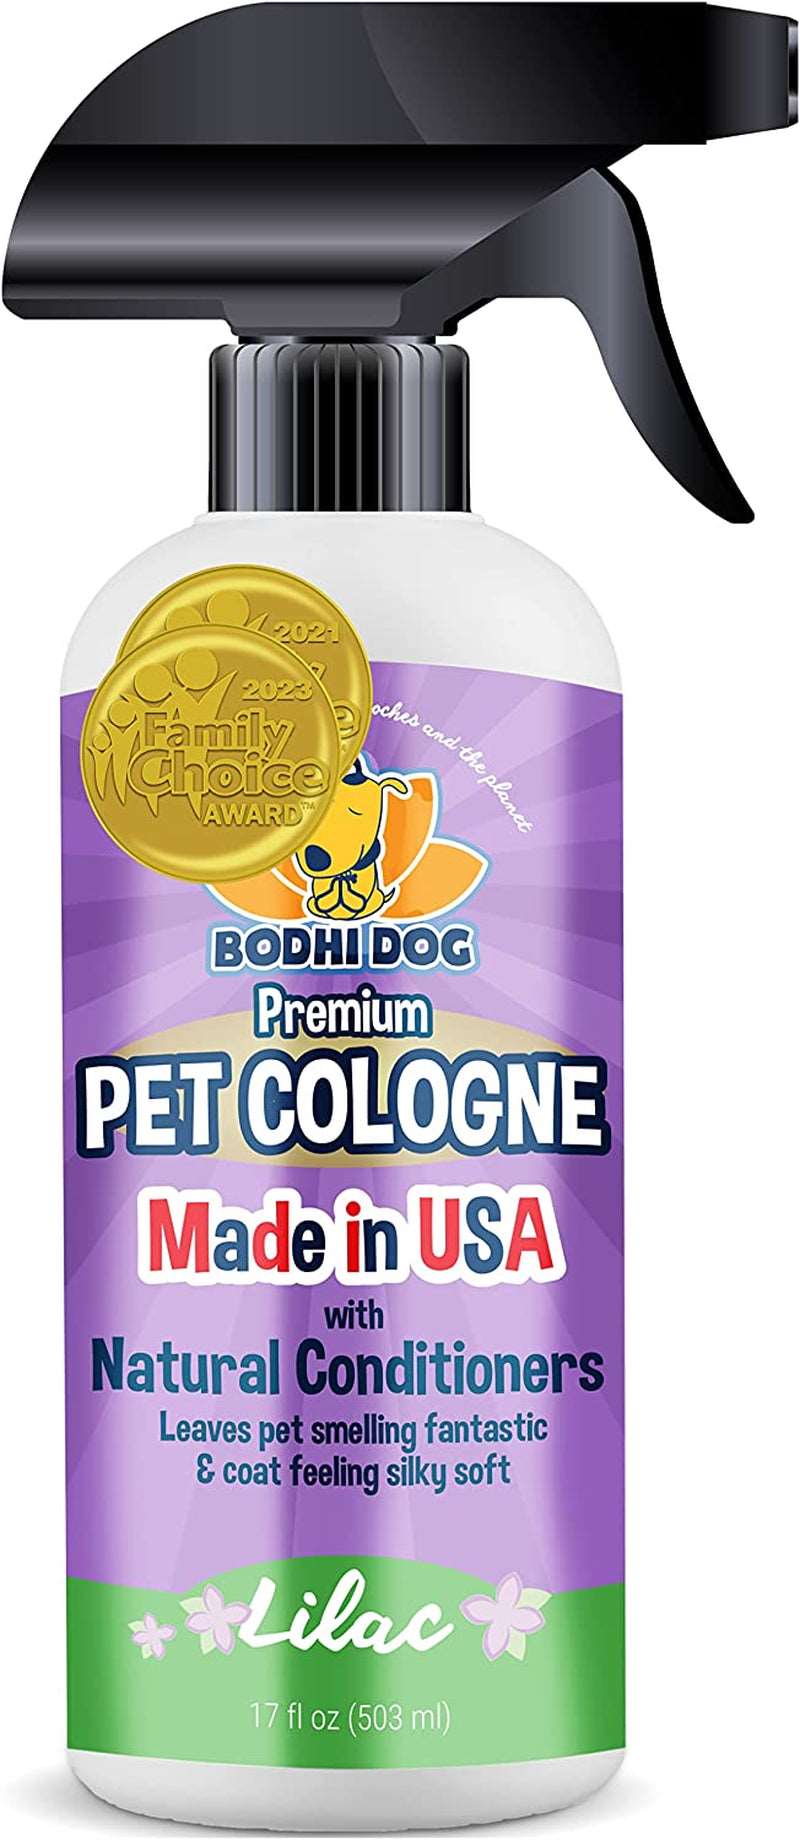 Cologne For Dogs